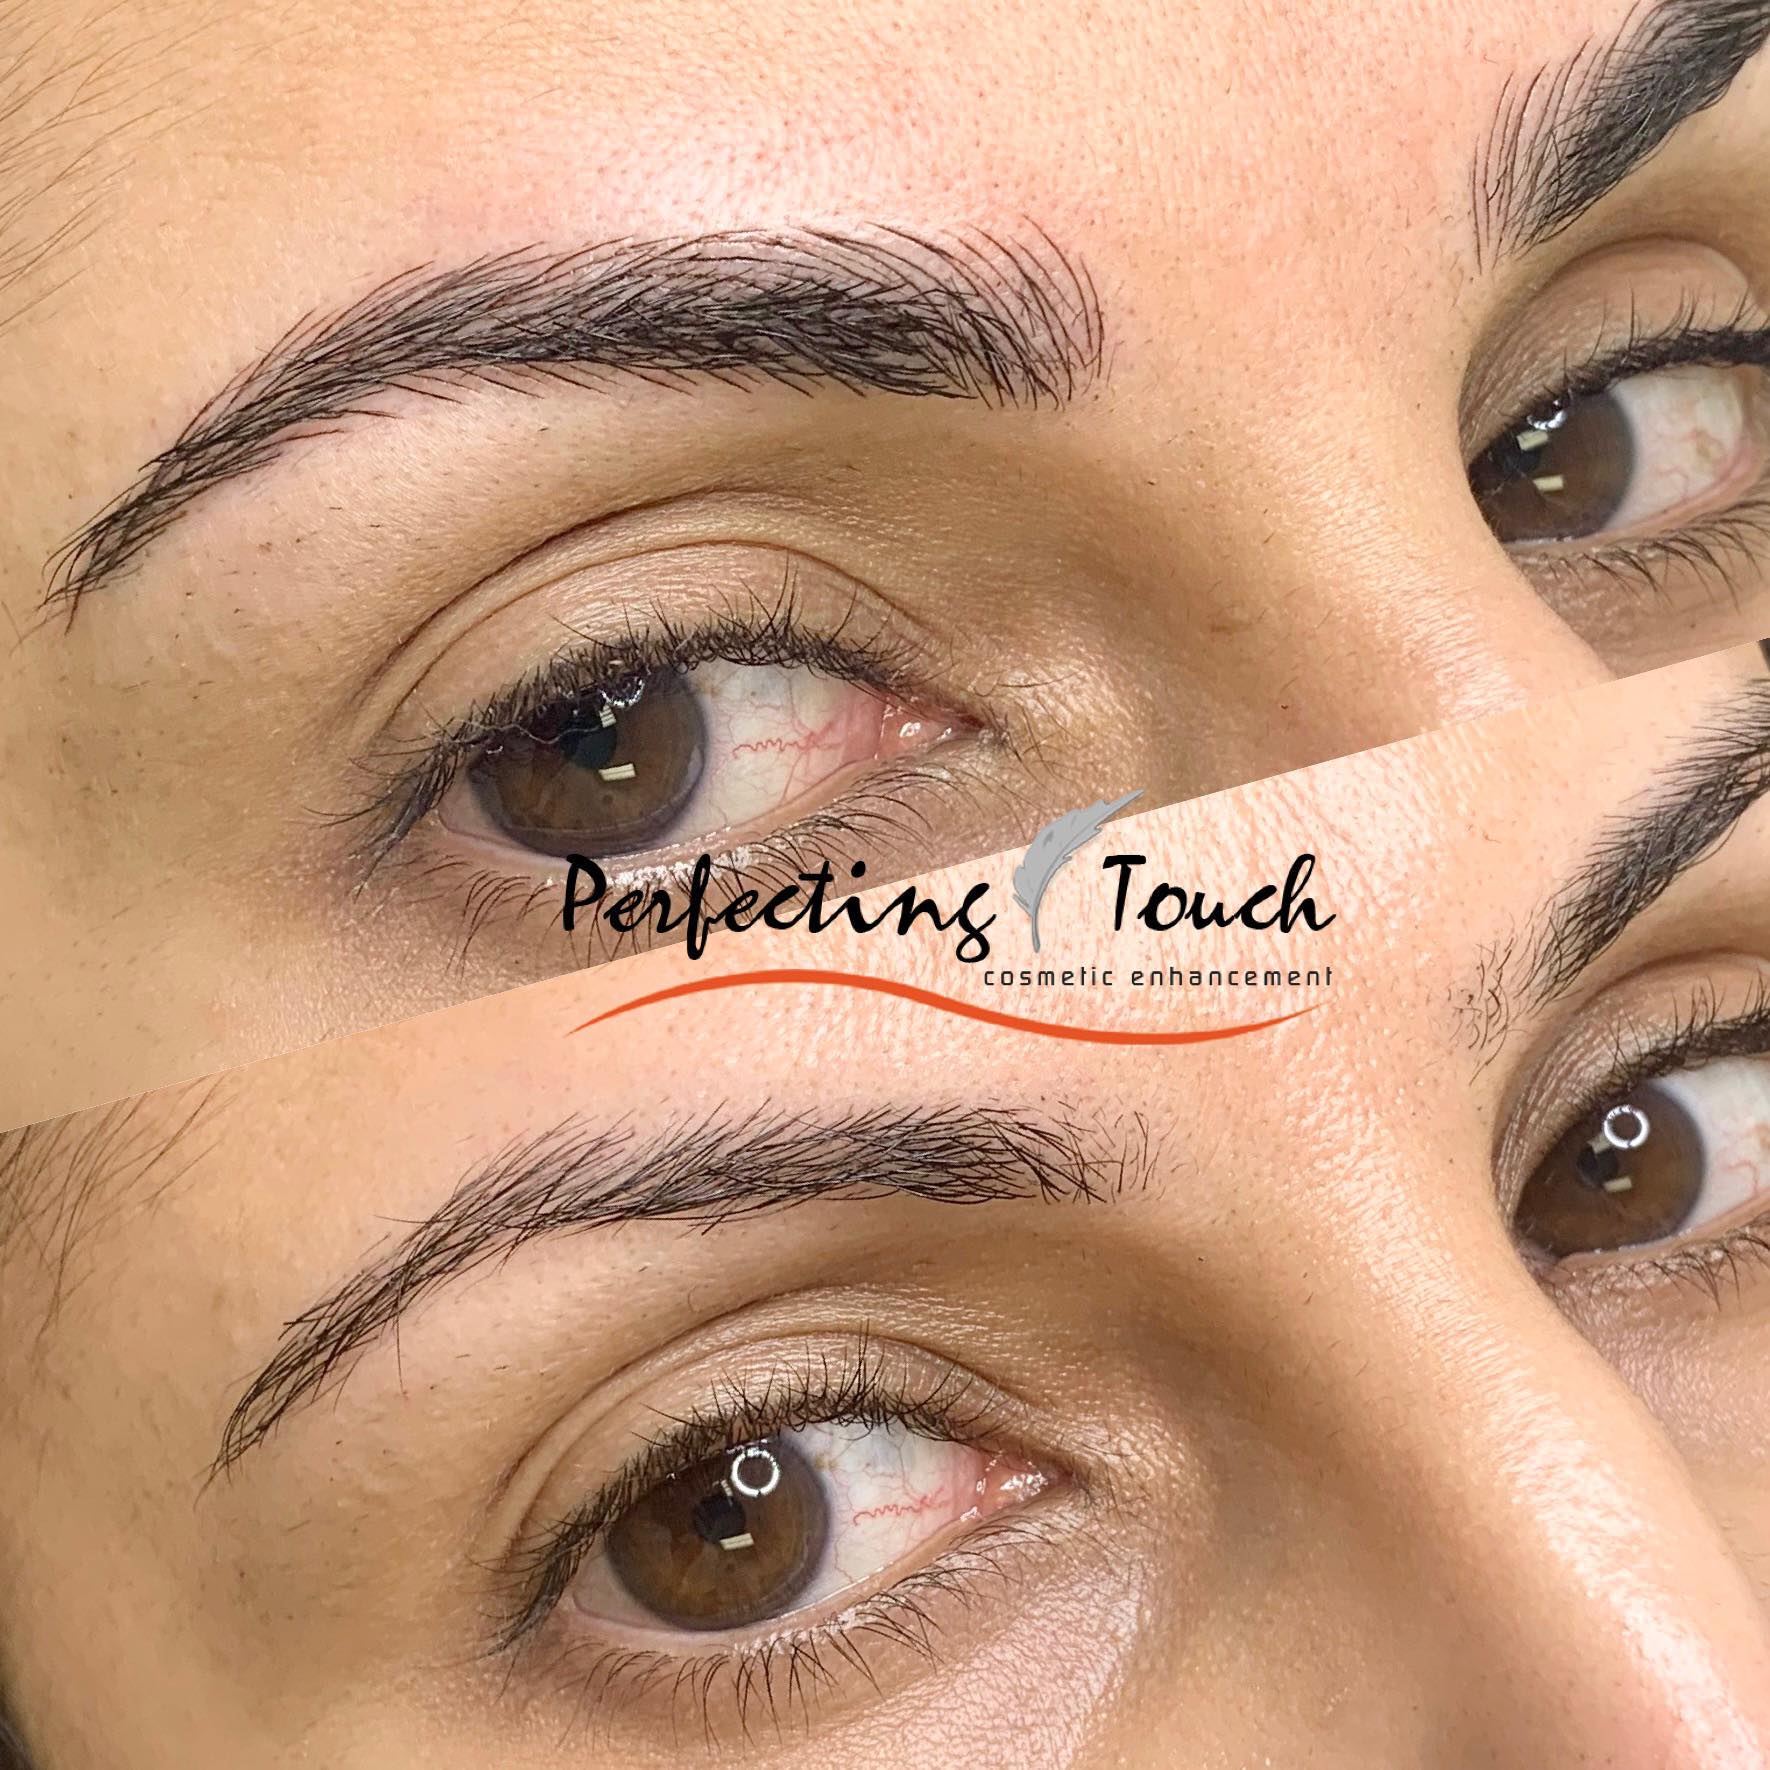 classic microblading strokes done on a Perfecting touch client's eyebrows